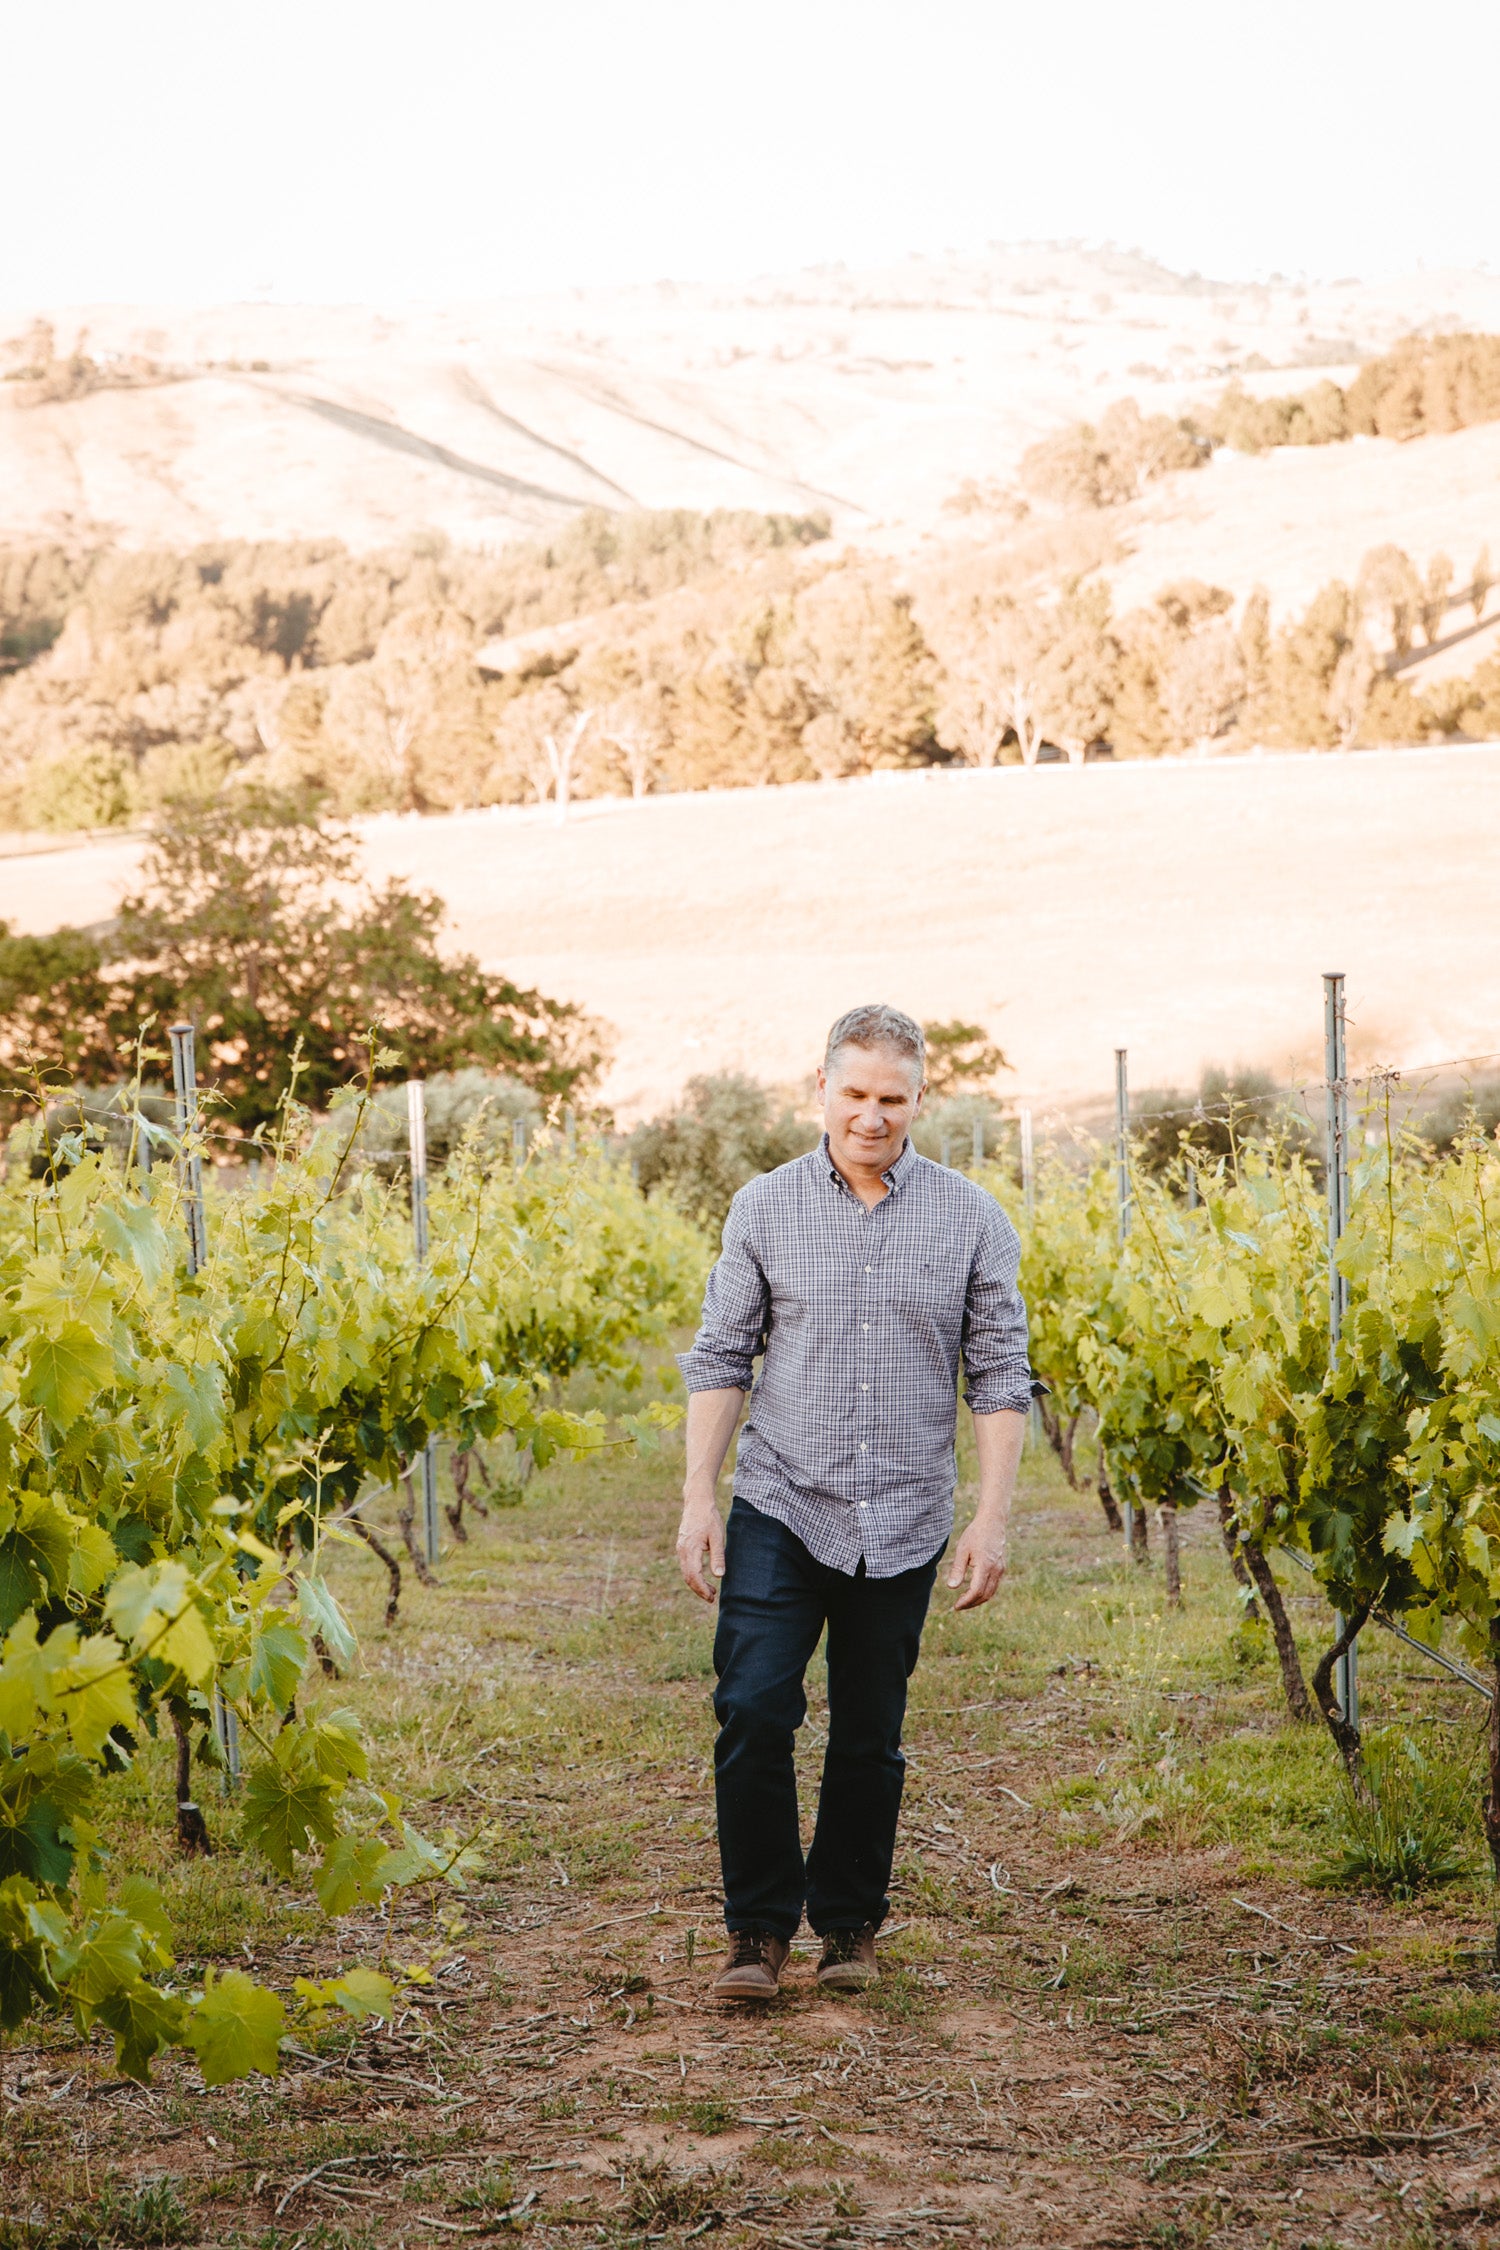 Winemaker Alex McKay walks the rows of a vineyard in the Canberra District wine region.